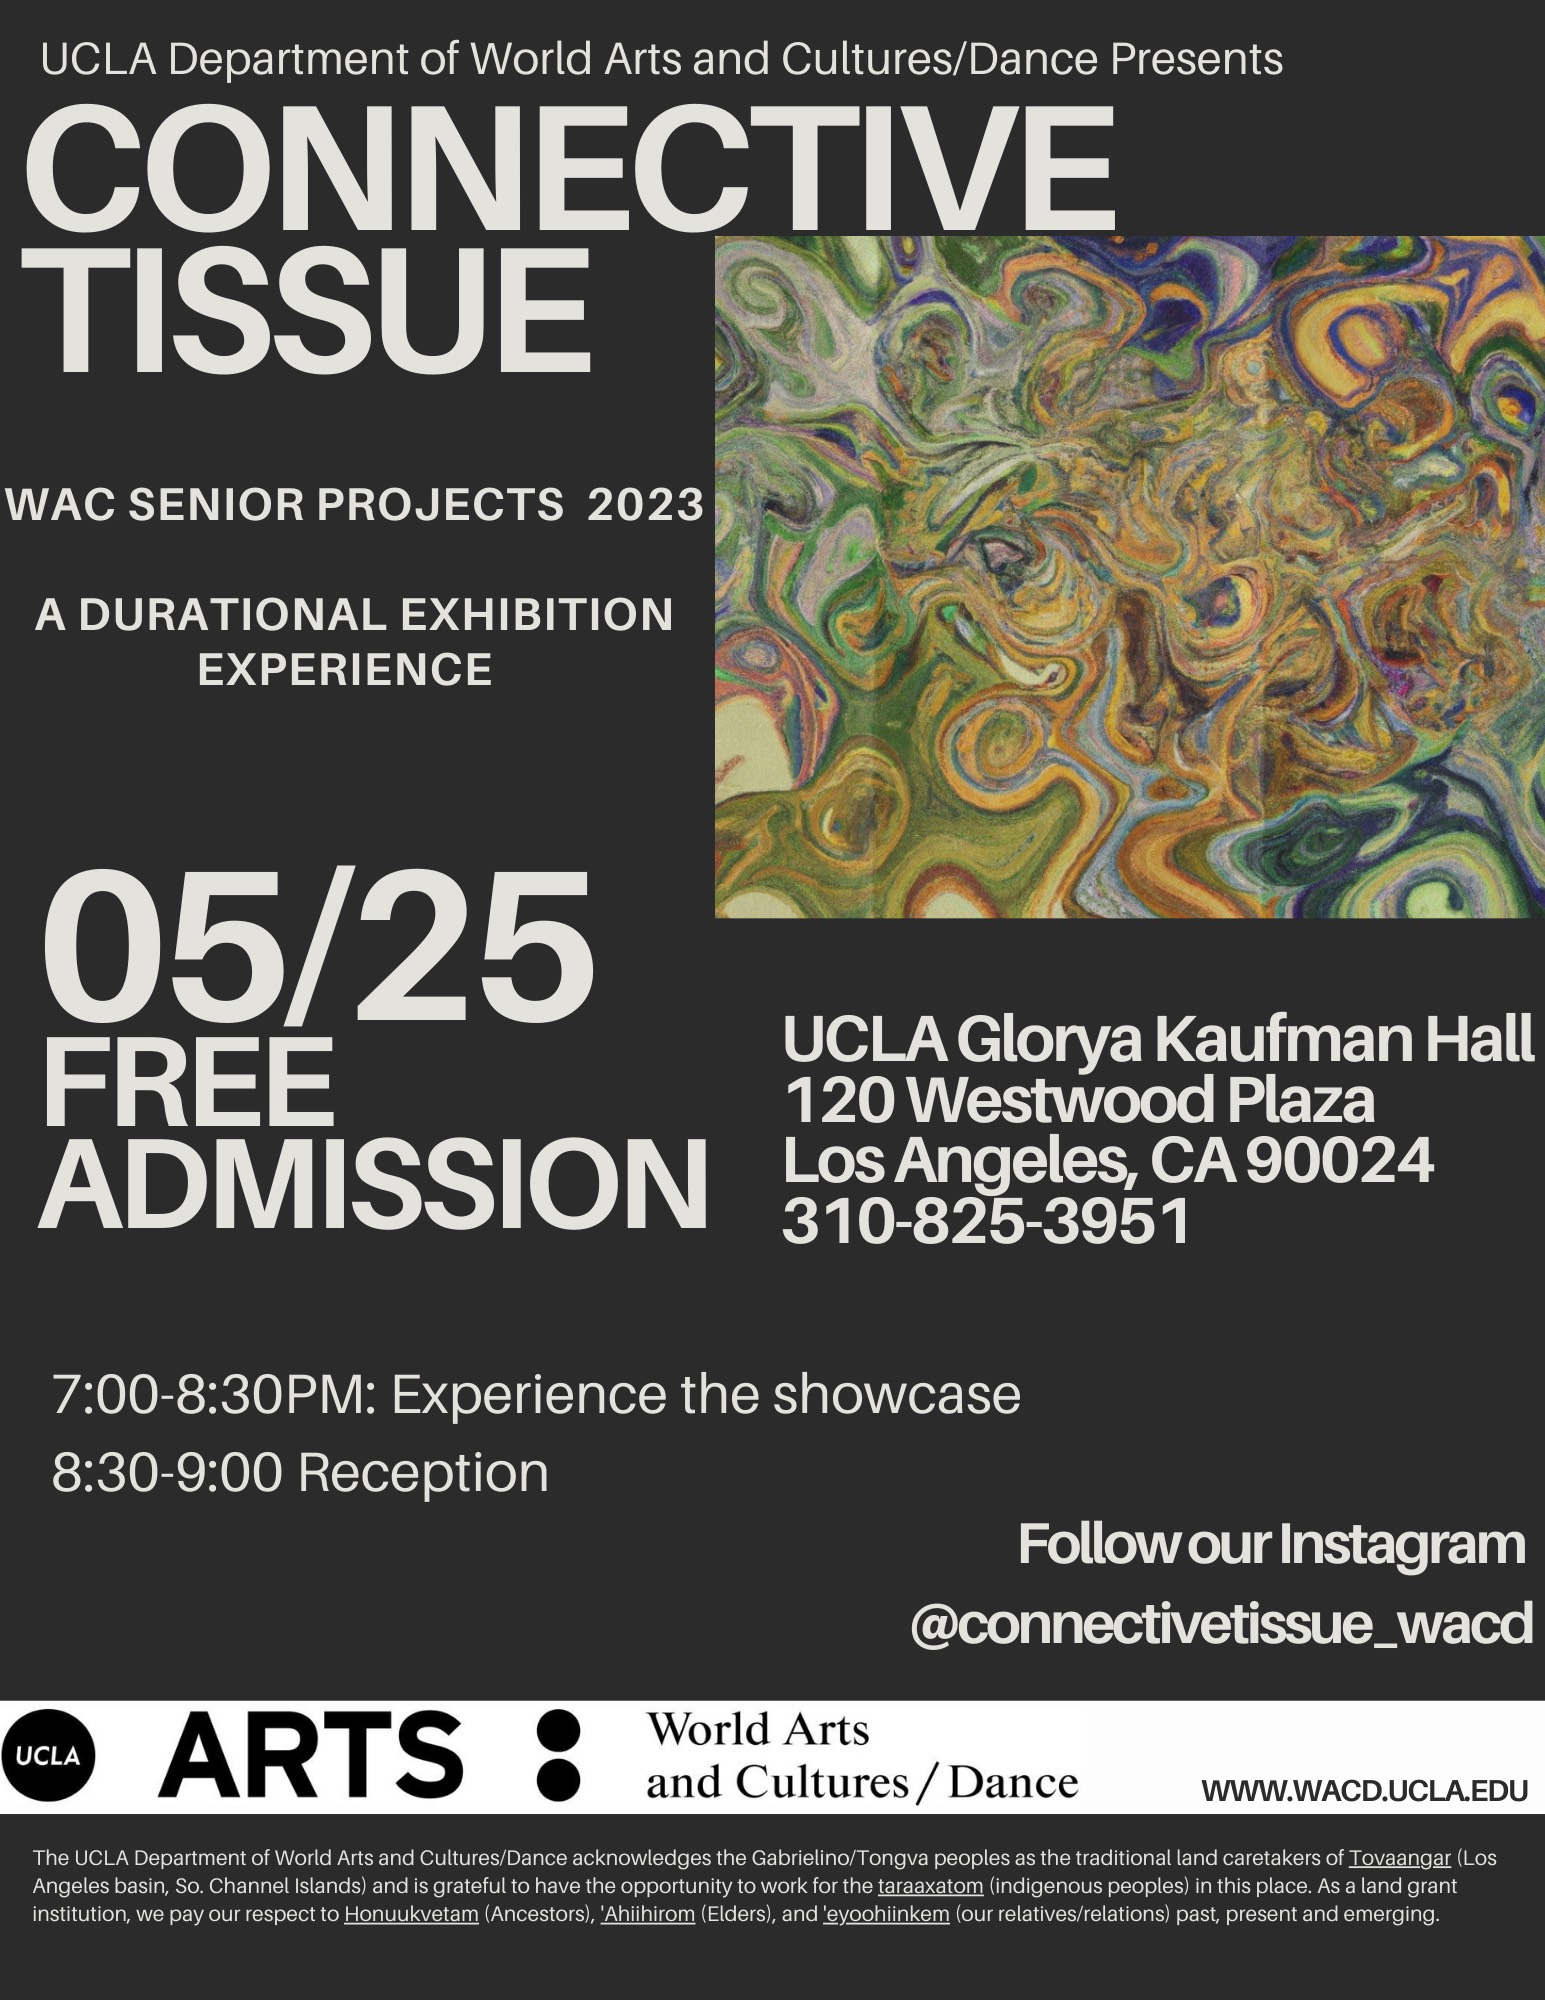 WAC Senior Projects 2023 Connective Tissue